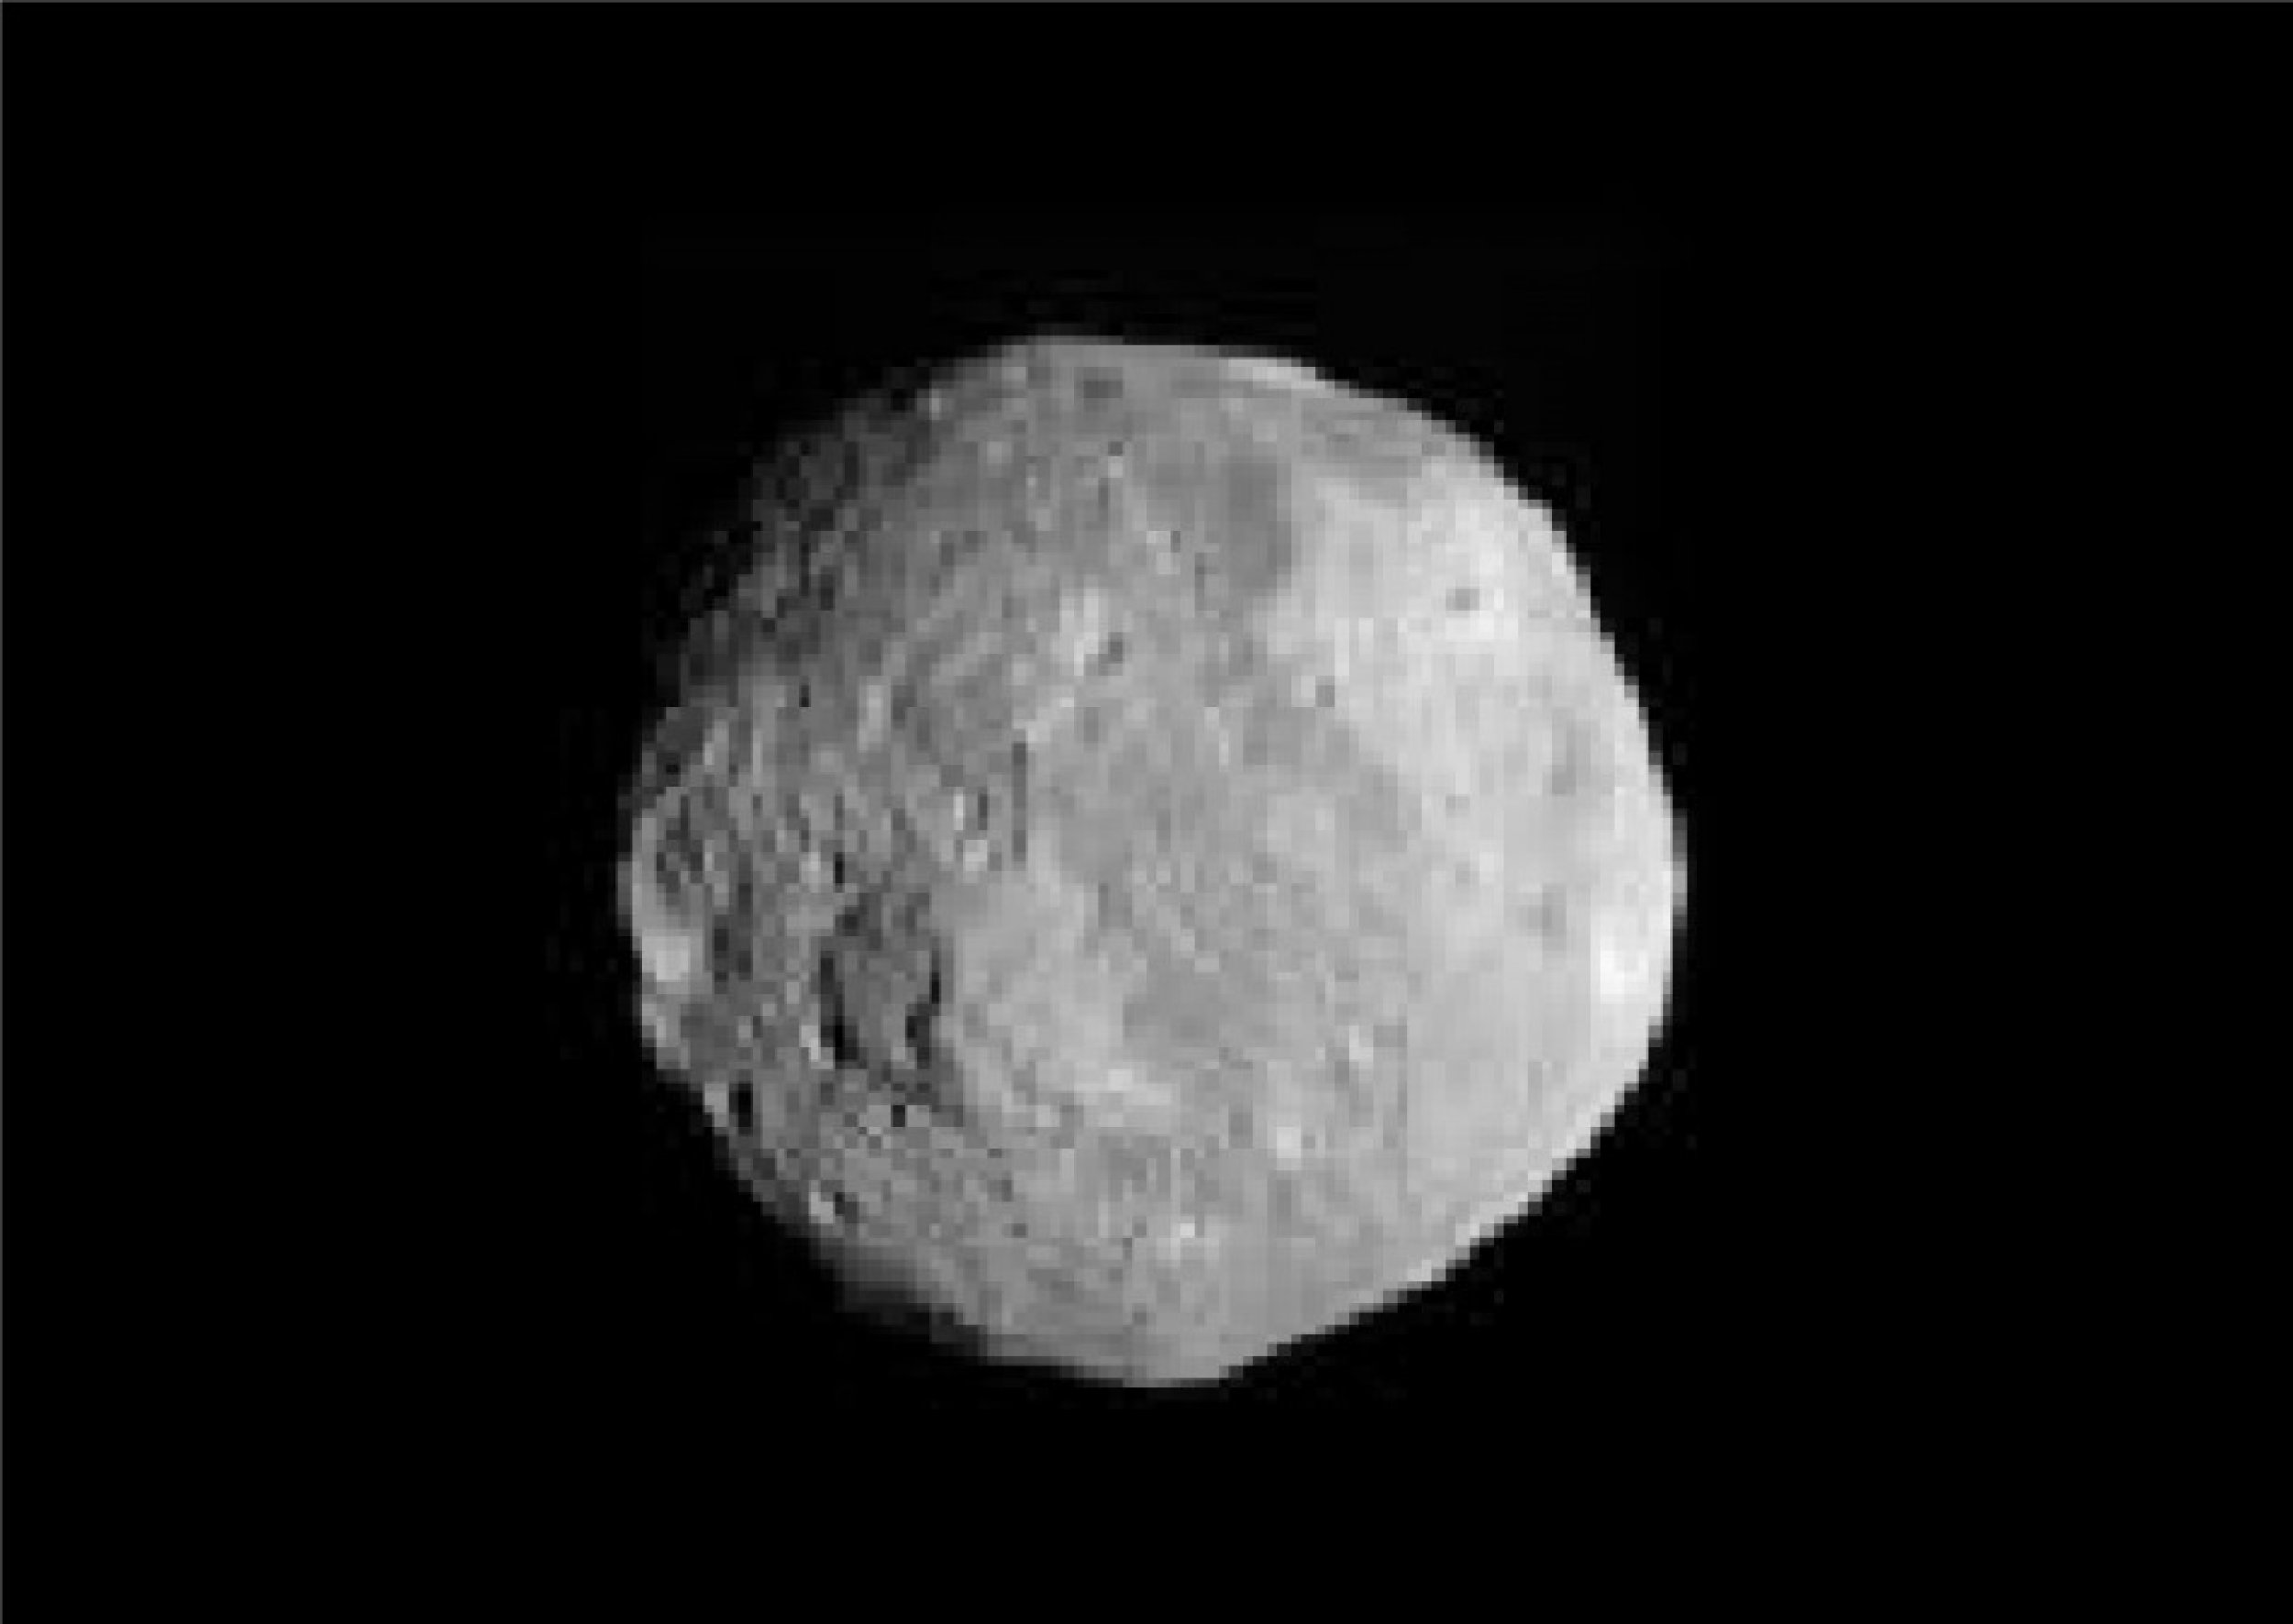 NASA039s Dawn spacecraft obtained this image of the giant asteroid Vesta with its framing camera on July 9, 2011.